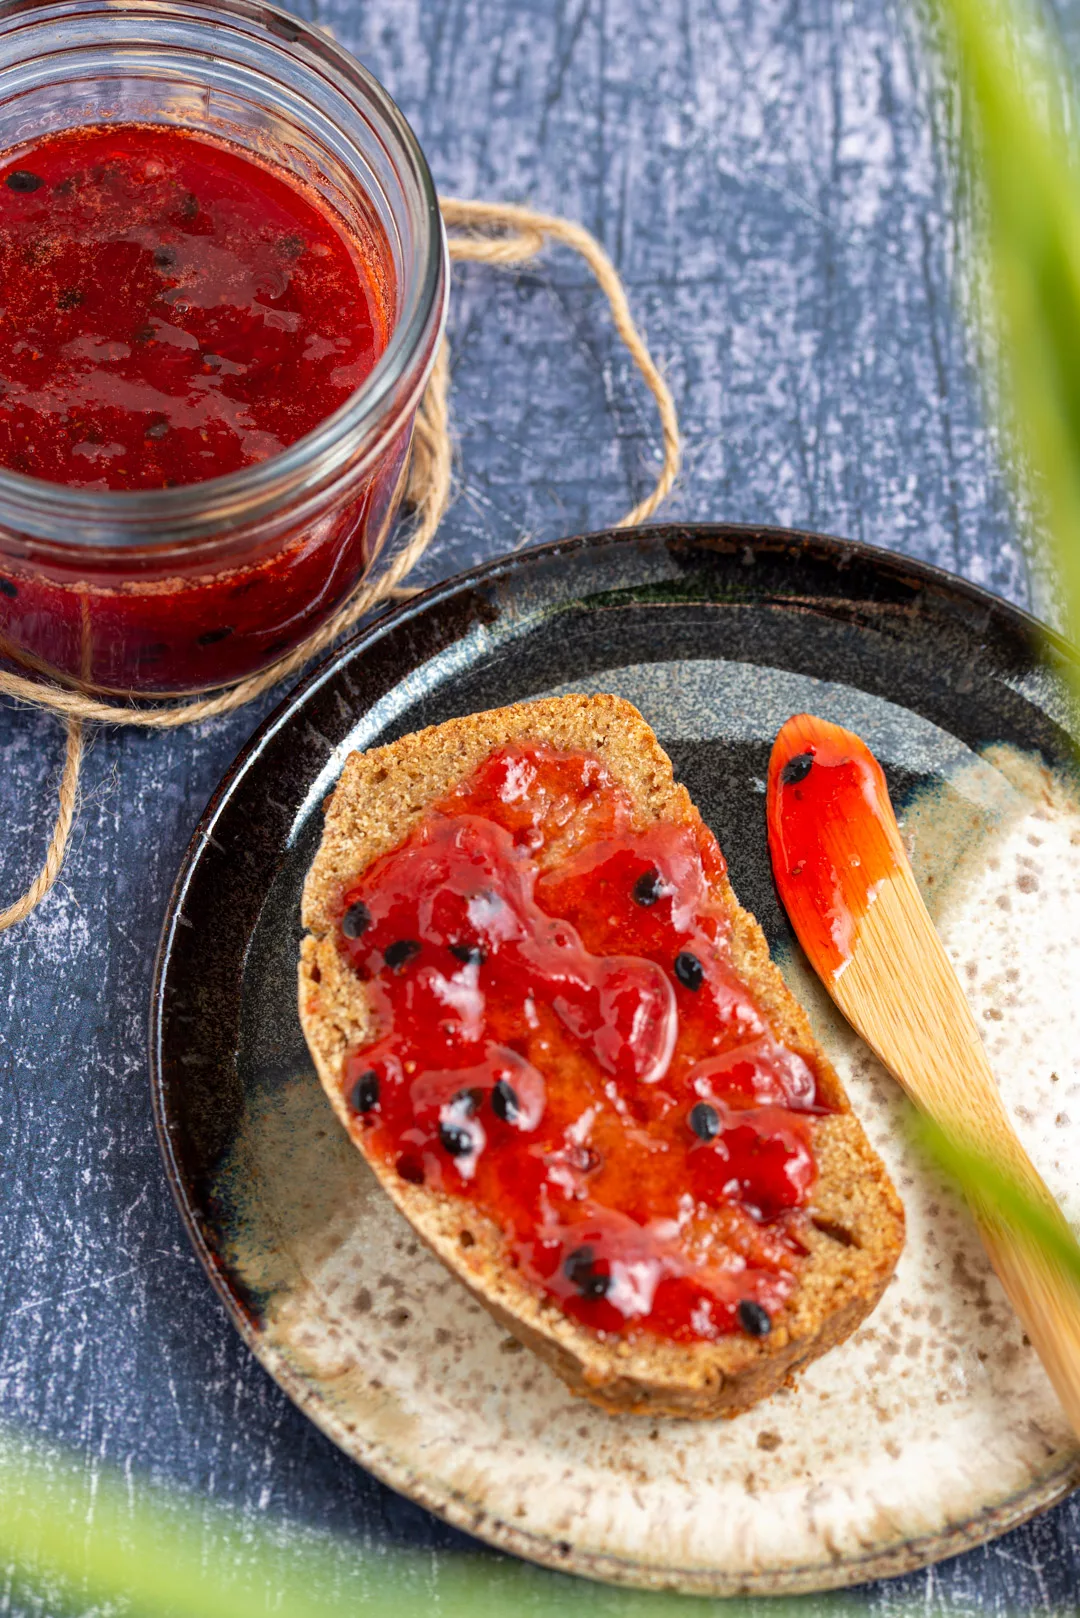 strawberry and passion fruit jam spread over a 